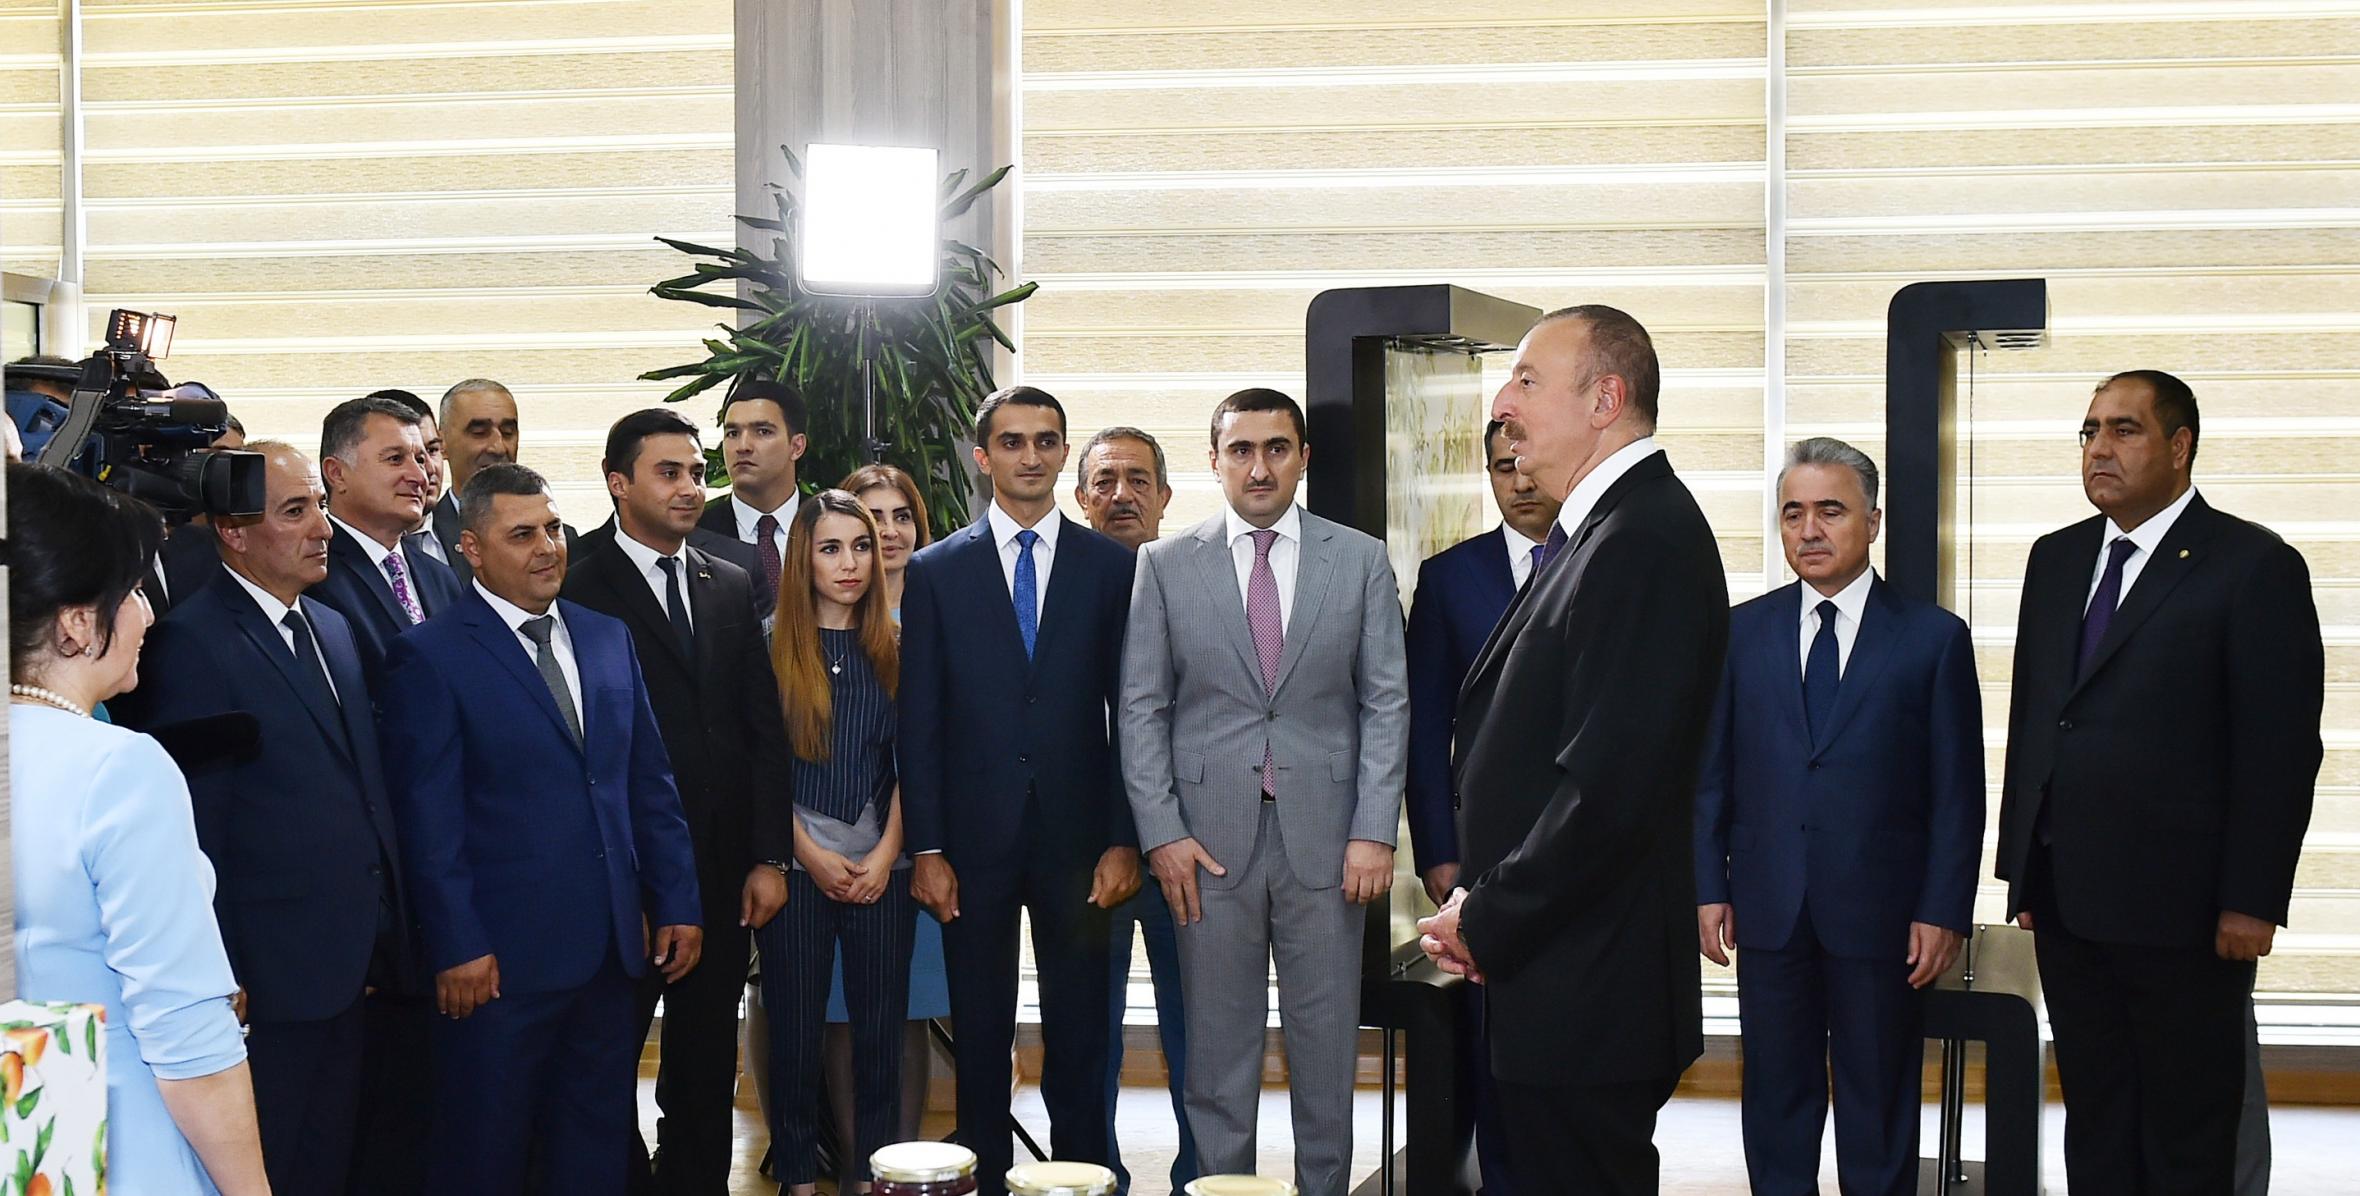 Speech by Ilham Aliyev at  the opening of ABAD Center in Balakan